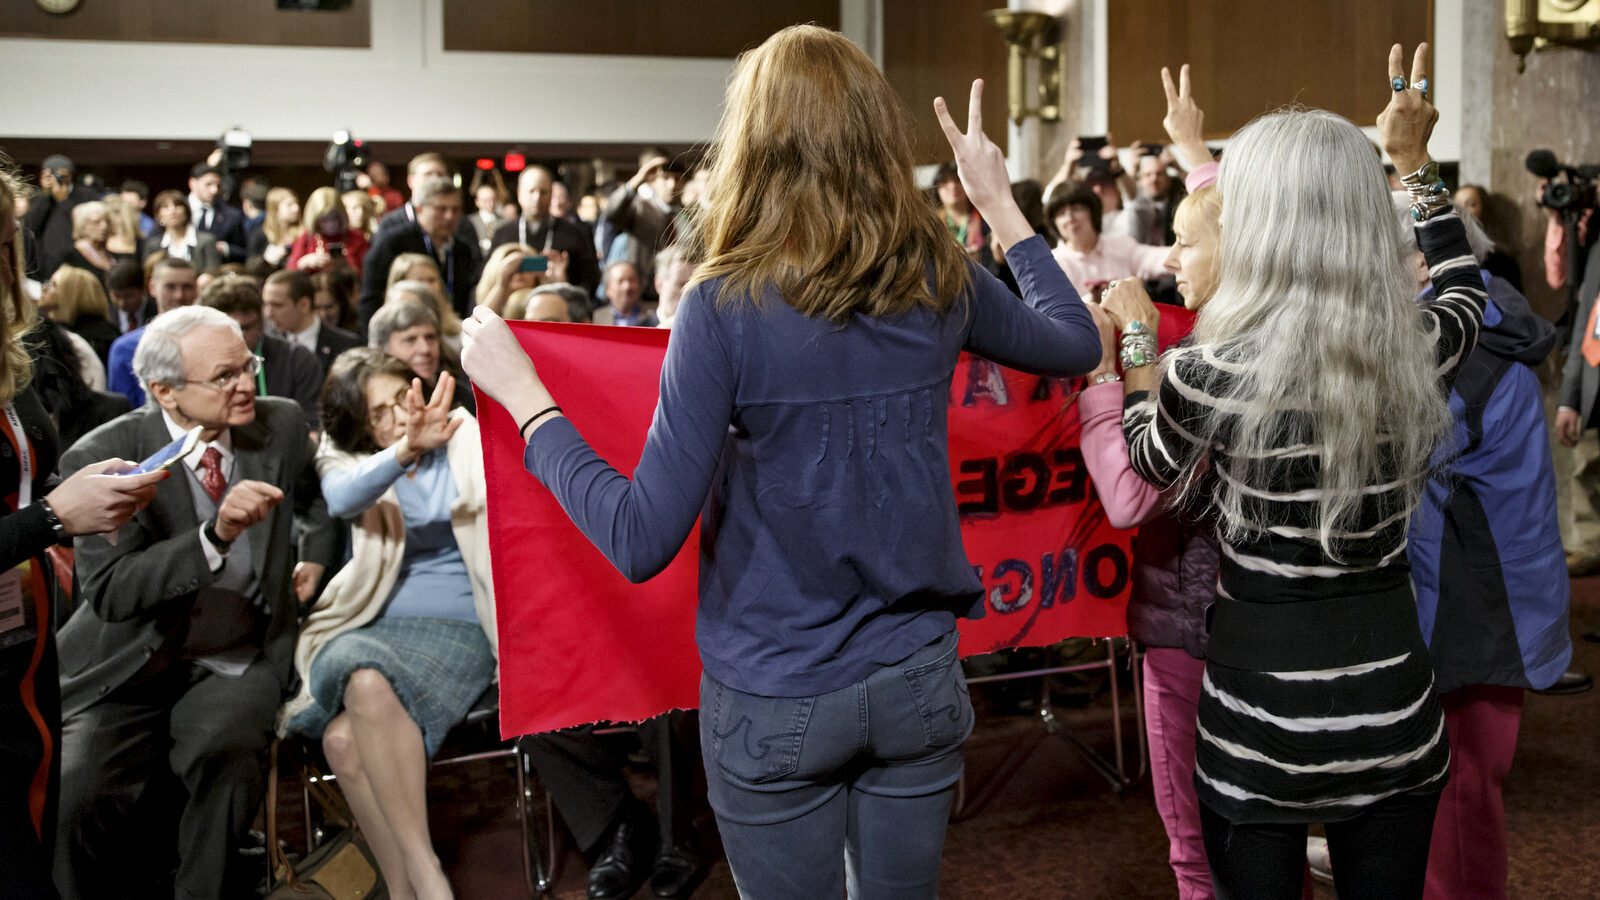 Demonstrators with the activist group Codepink disrupt an event hosted by an organization fighting discrimination against Jews just before a panel discussion with Holocaust survivor Elie Weisel and Sen. Ted Cruz, R-Texas, on Capitol Hill in Washington, Monday, March 2, 2015. (AP/J. Scott Applewhite)